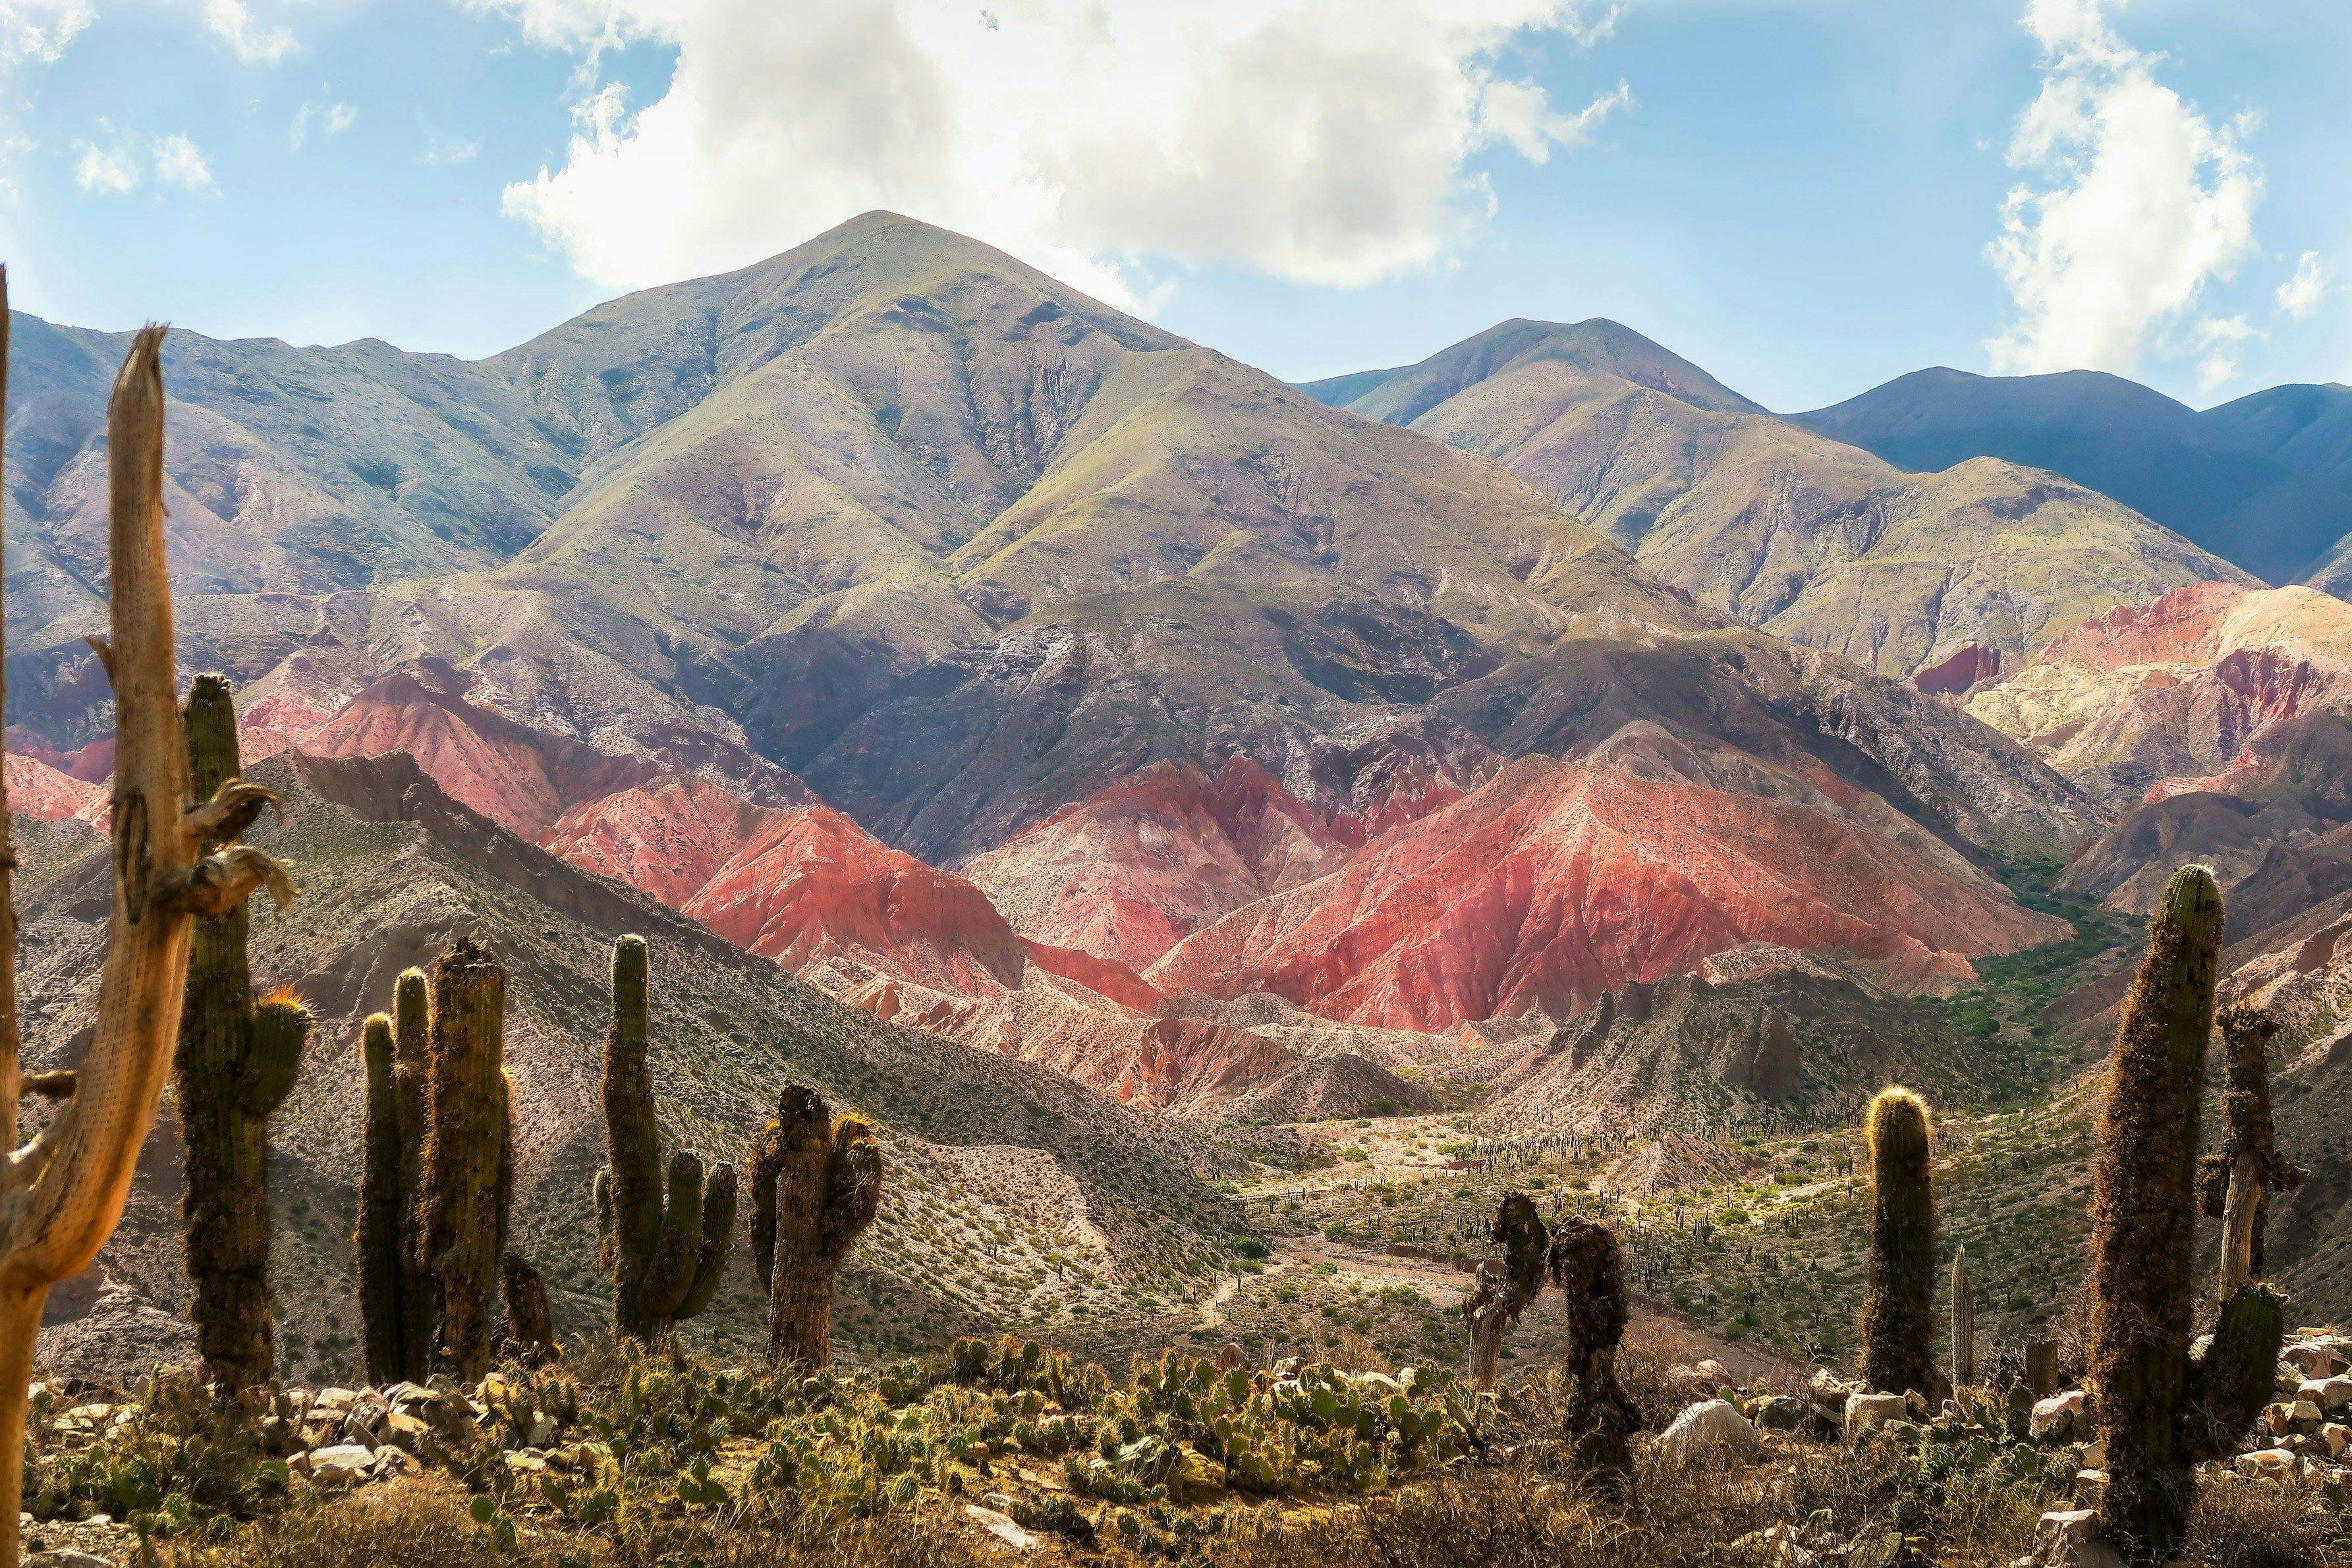 Mountains and cactuses in Jujuy Argentina.